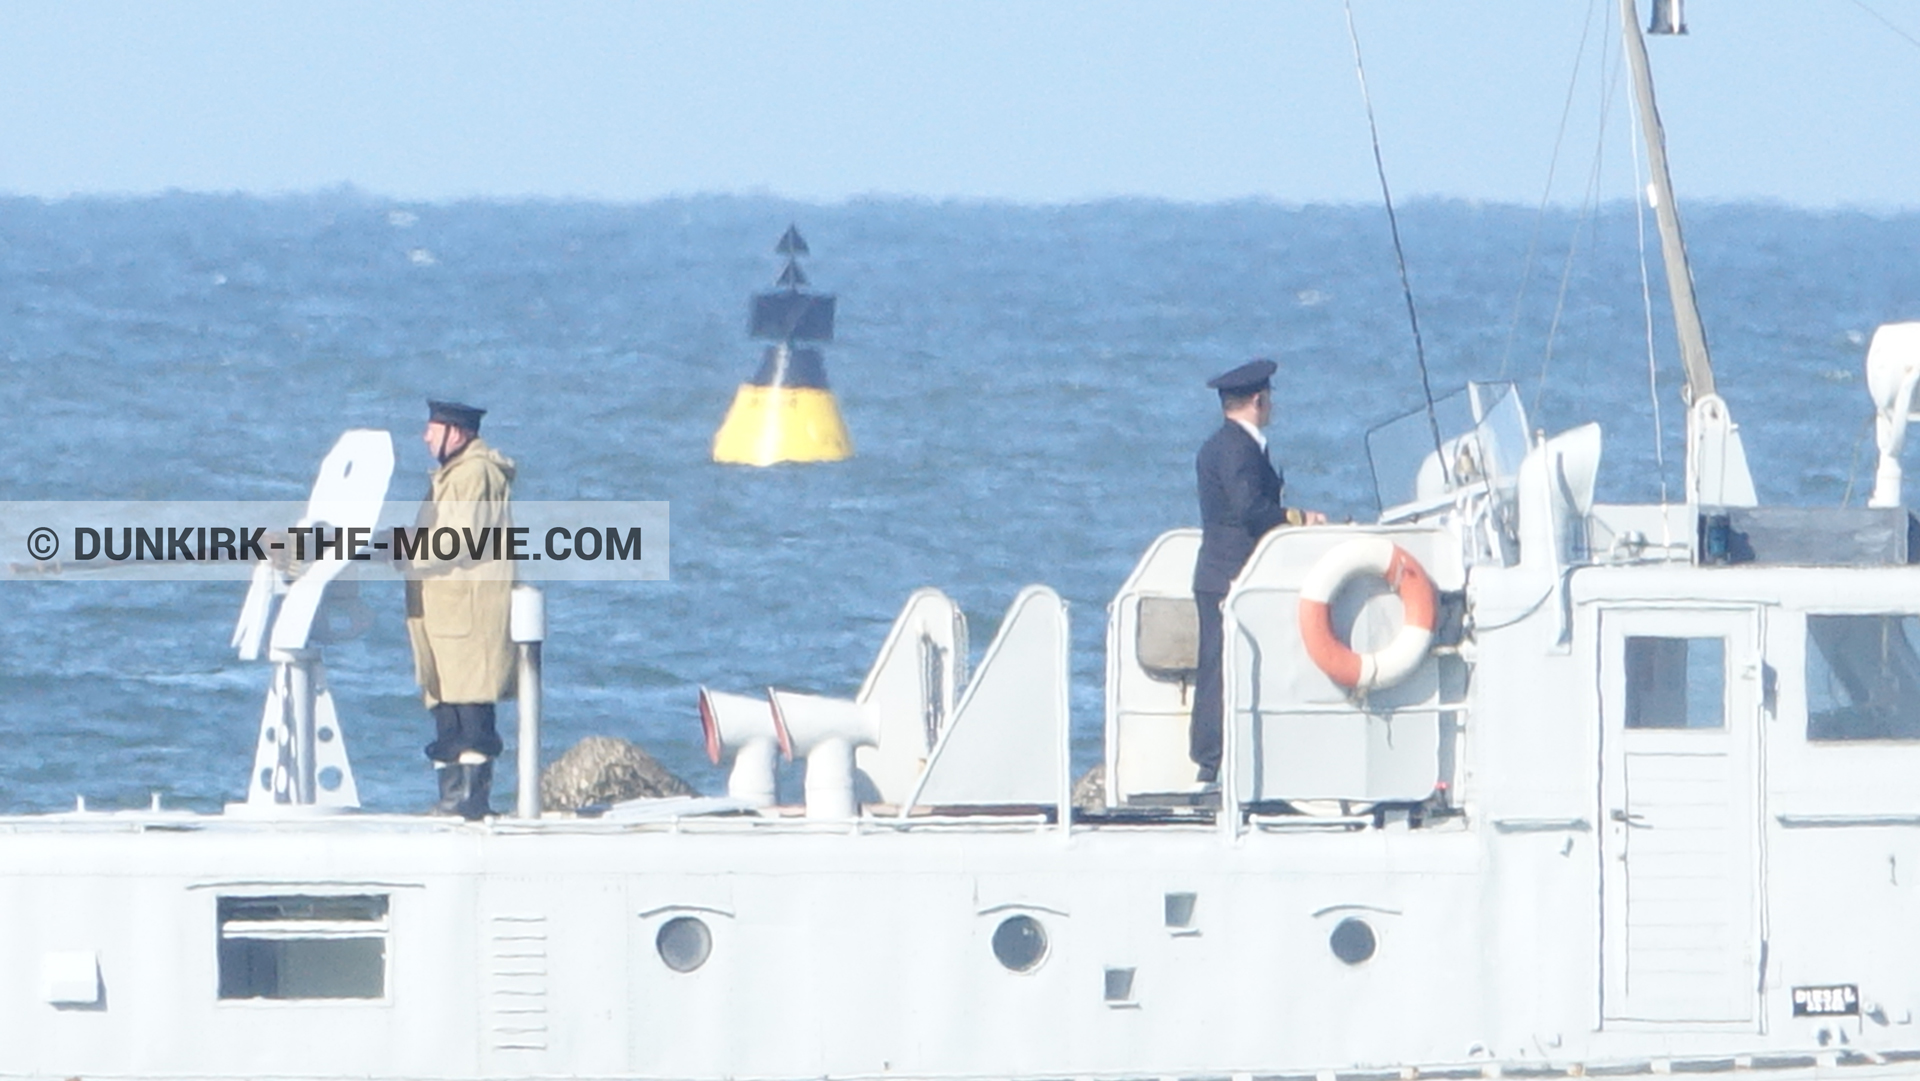 Picture with boat, blue sky, supernumeraries, calm sea, PR 22,  from behind the scene of the Dunkirk movie by Nolan